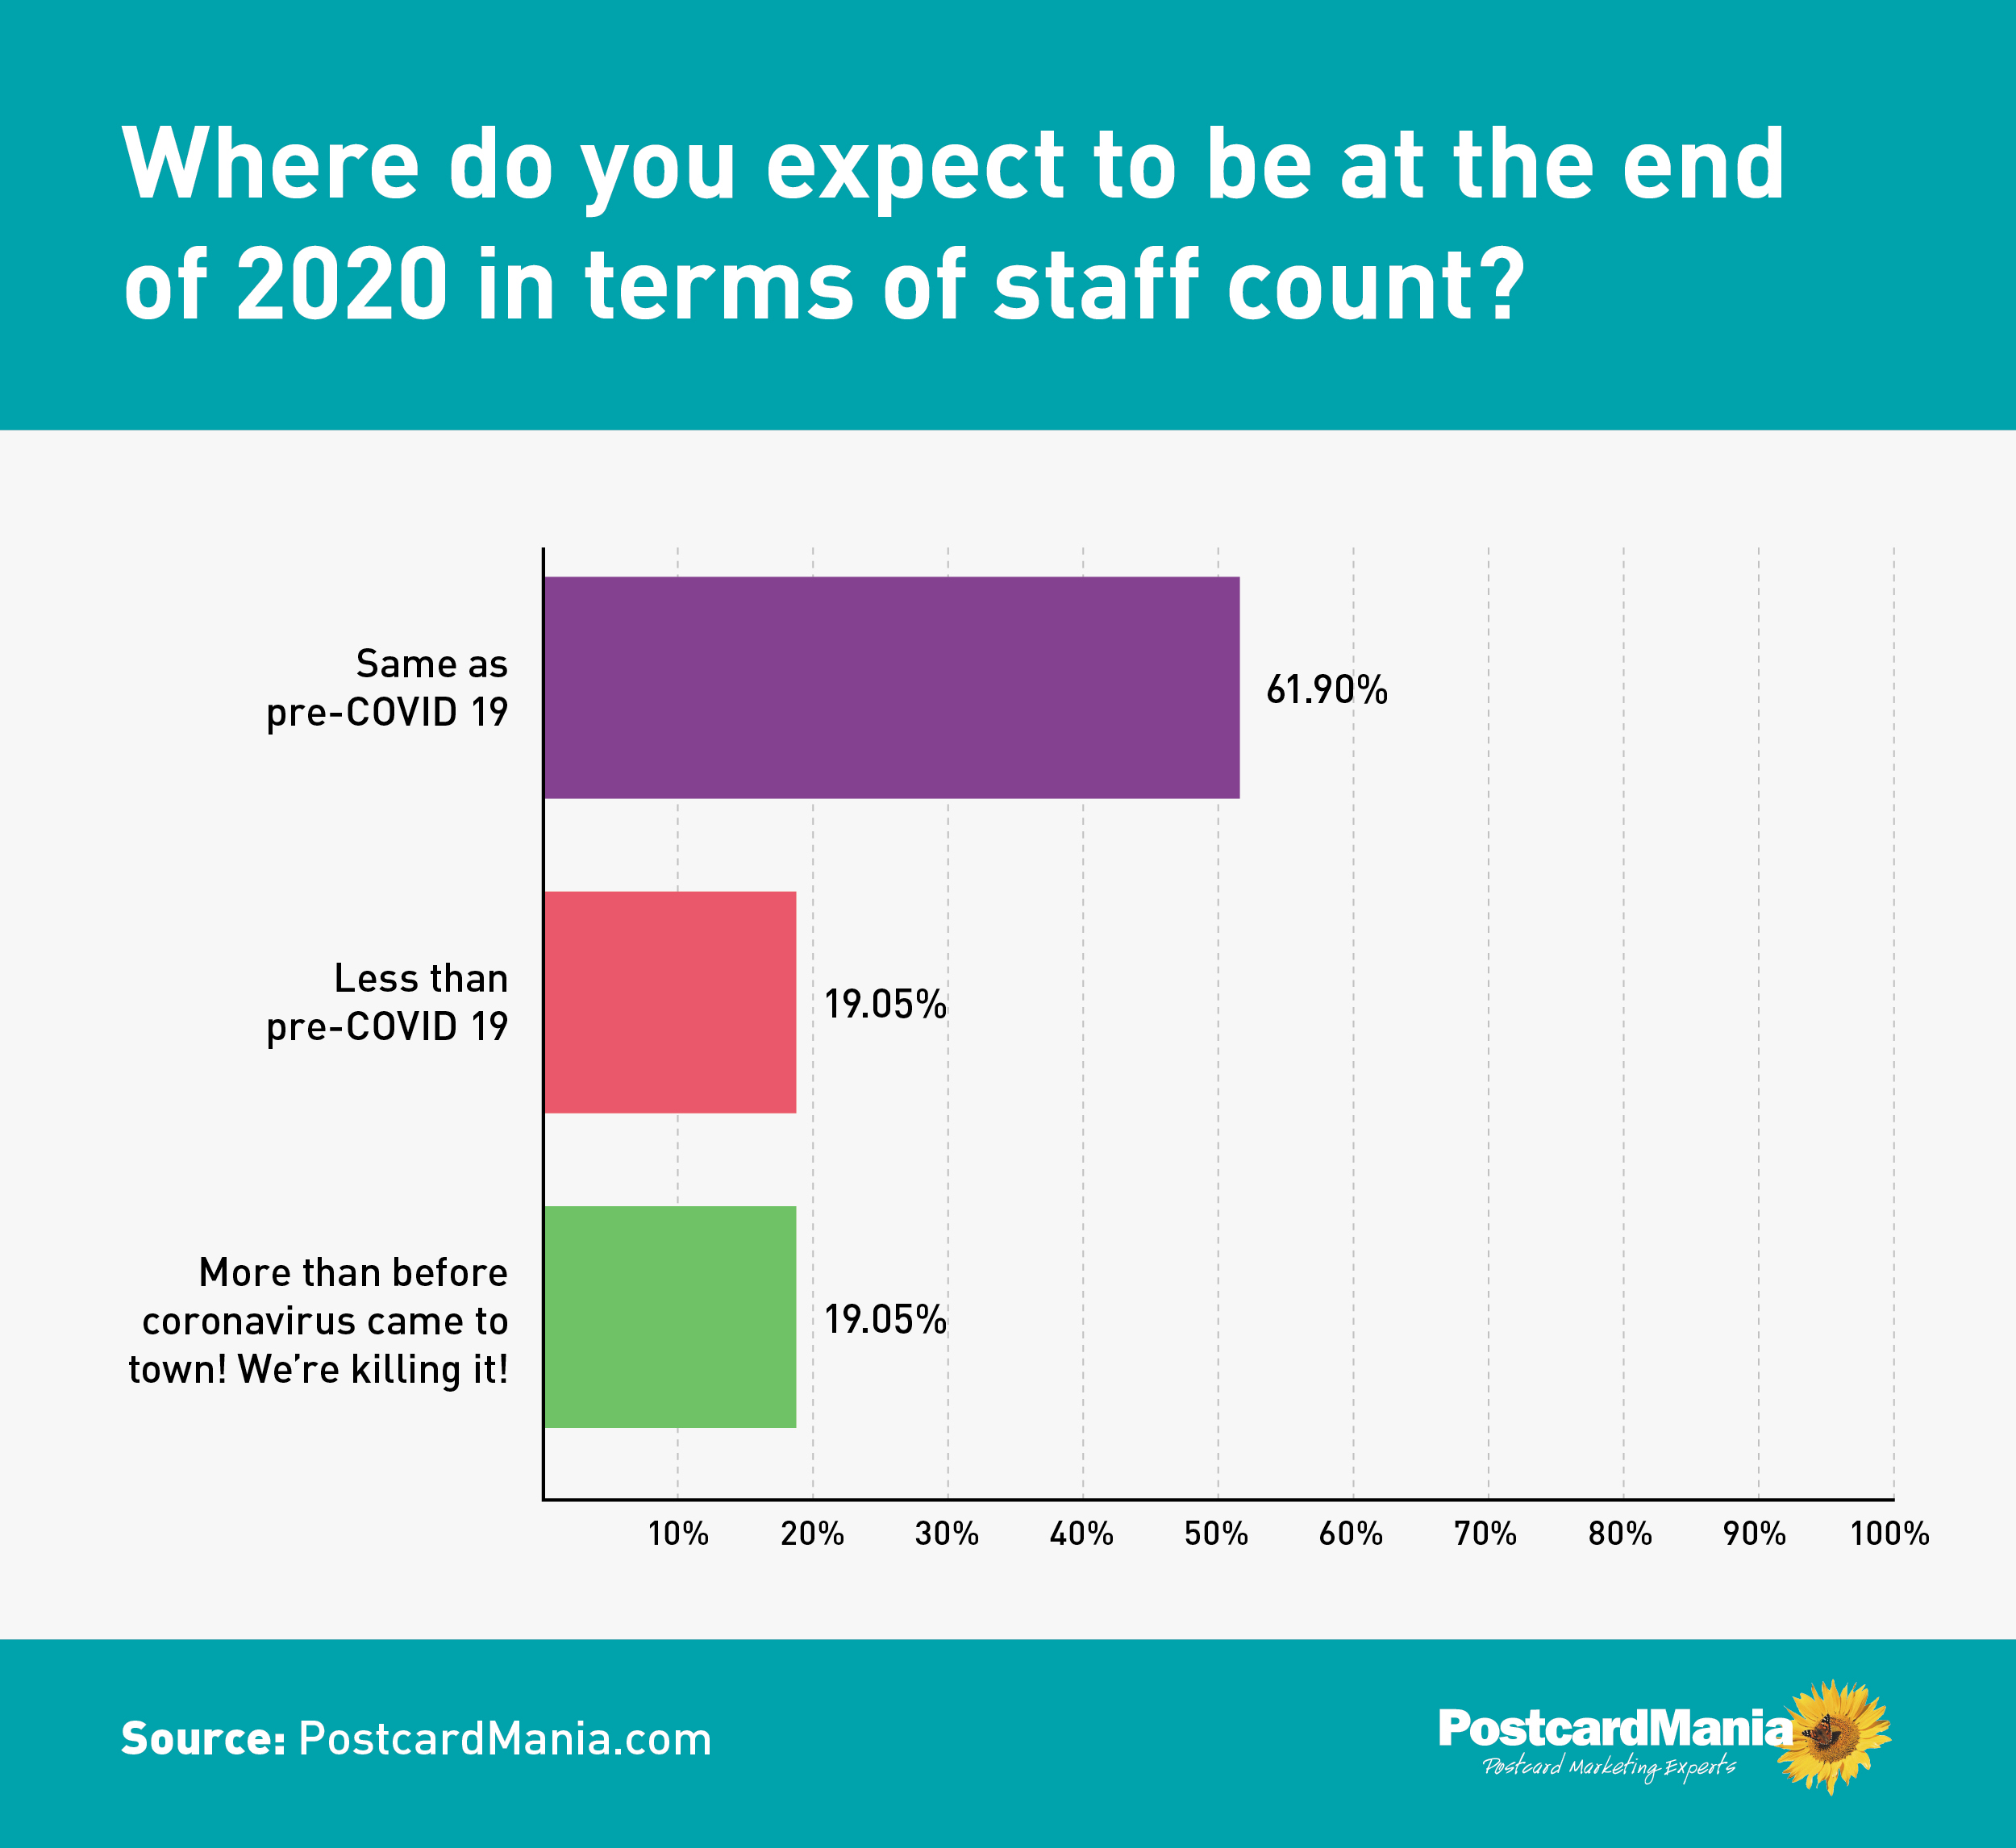 COVID-19 Survey - Where do you expect to be at the end of 2020 in terms of staff count?